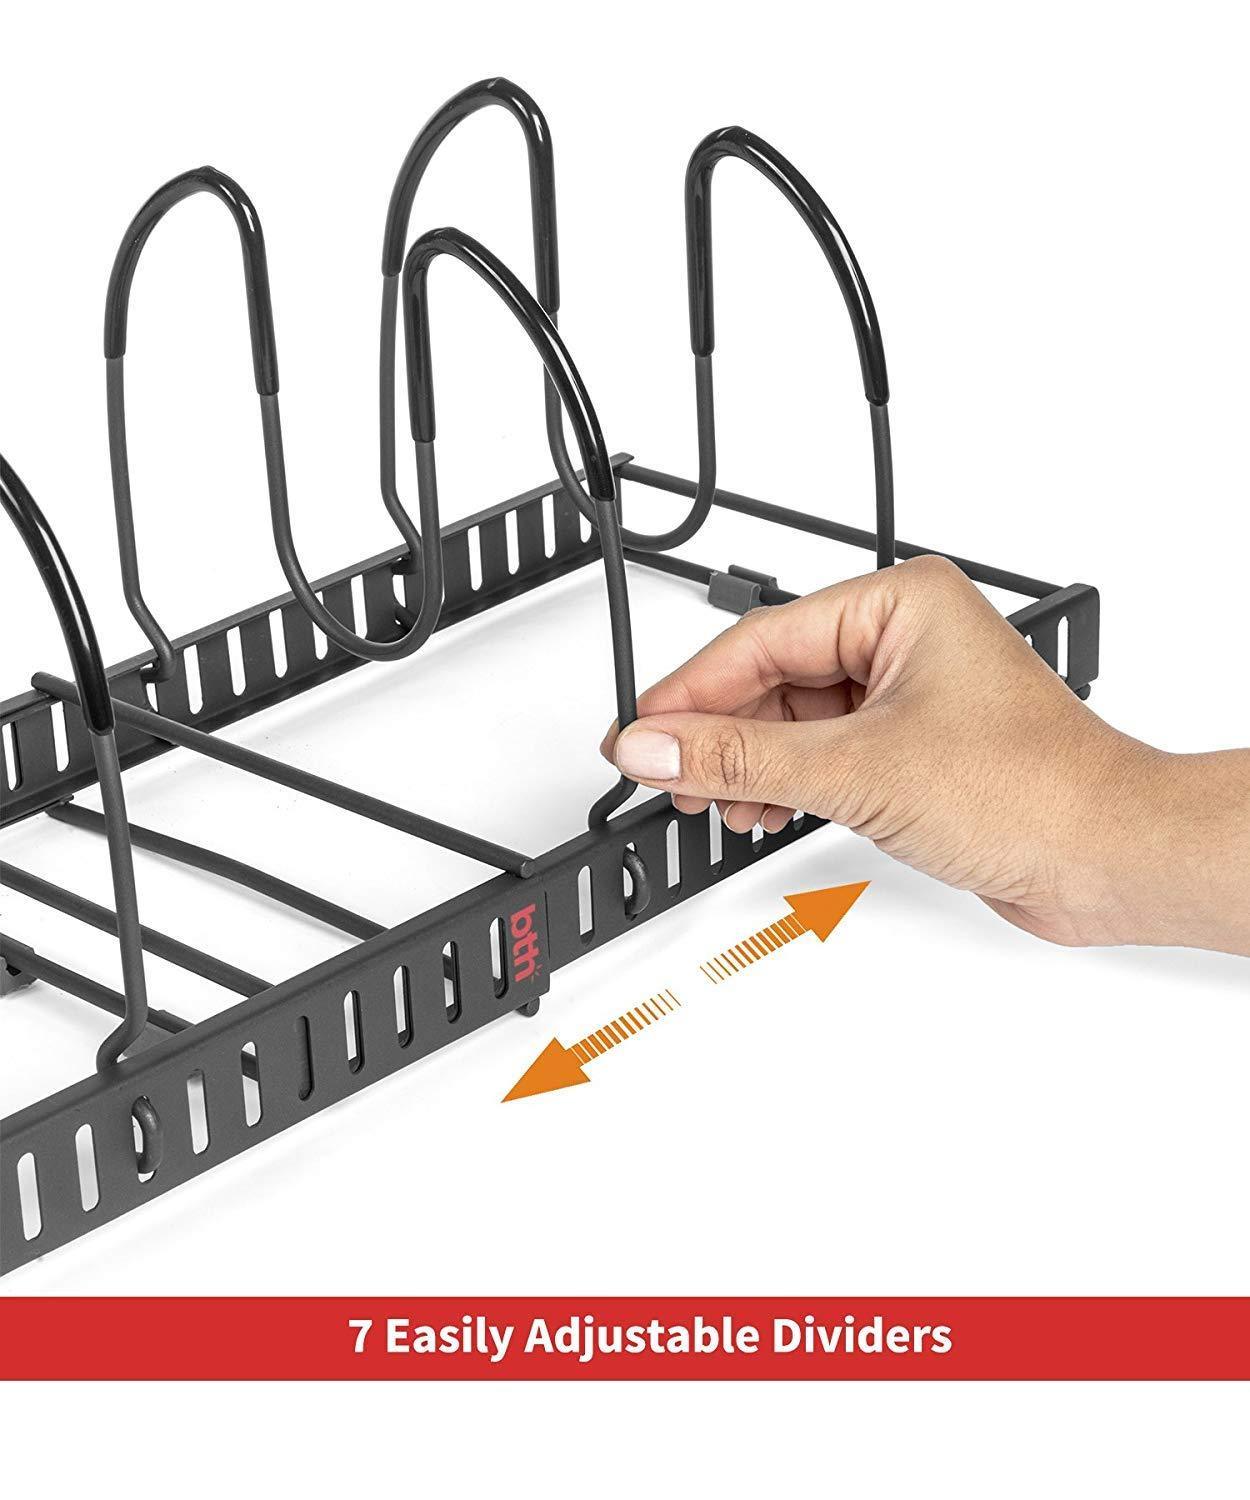 Storage organizer 7 pans expandable pan and pot organizer rack separable or expandable frames 7 adjustable compartments kitchen cast iron skillets bakeware plate lid holder pantry